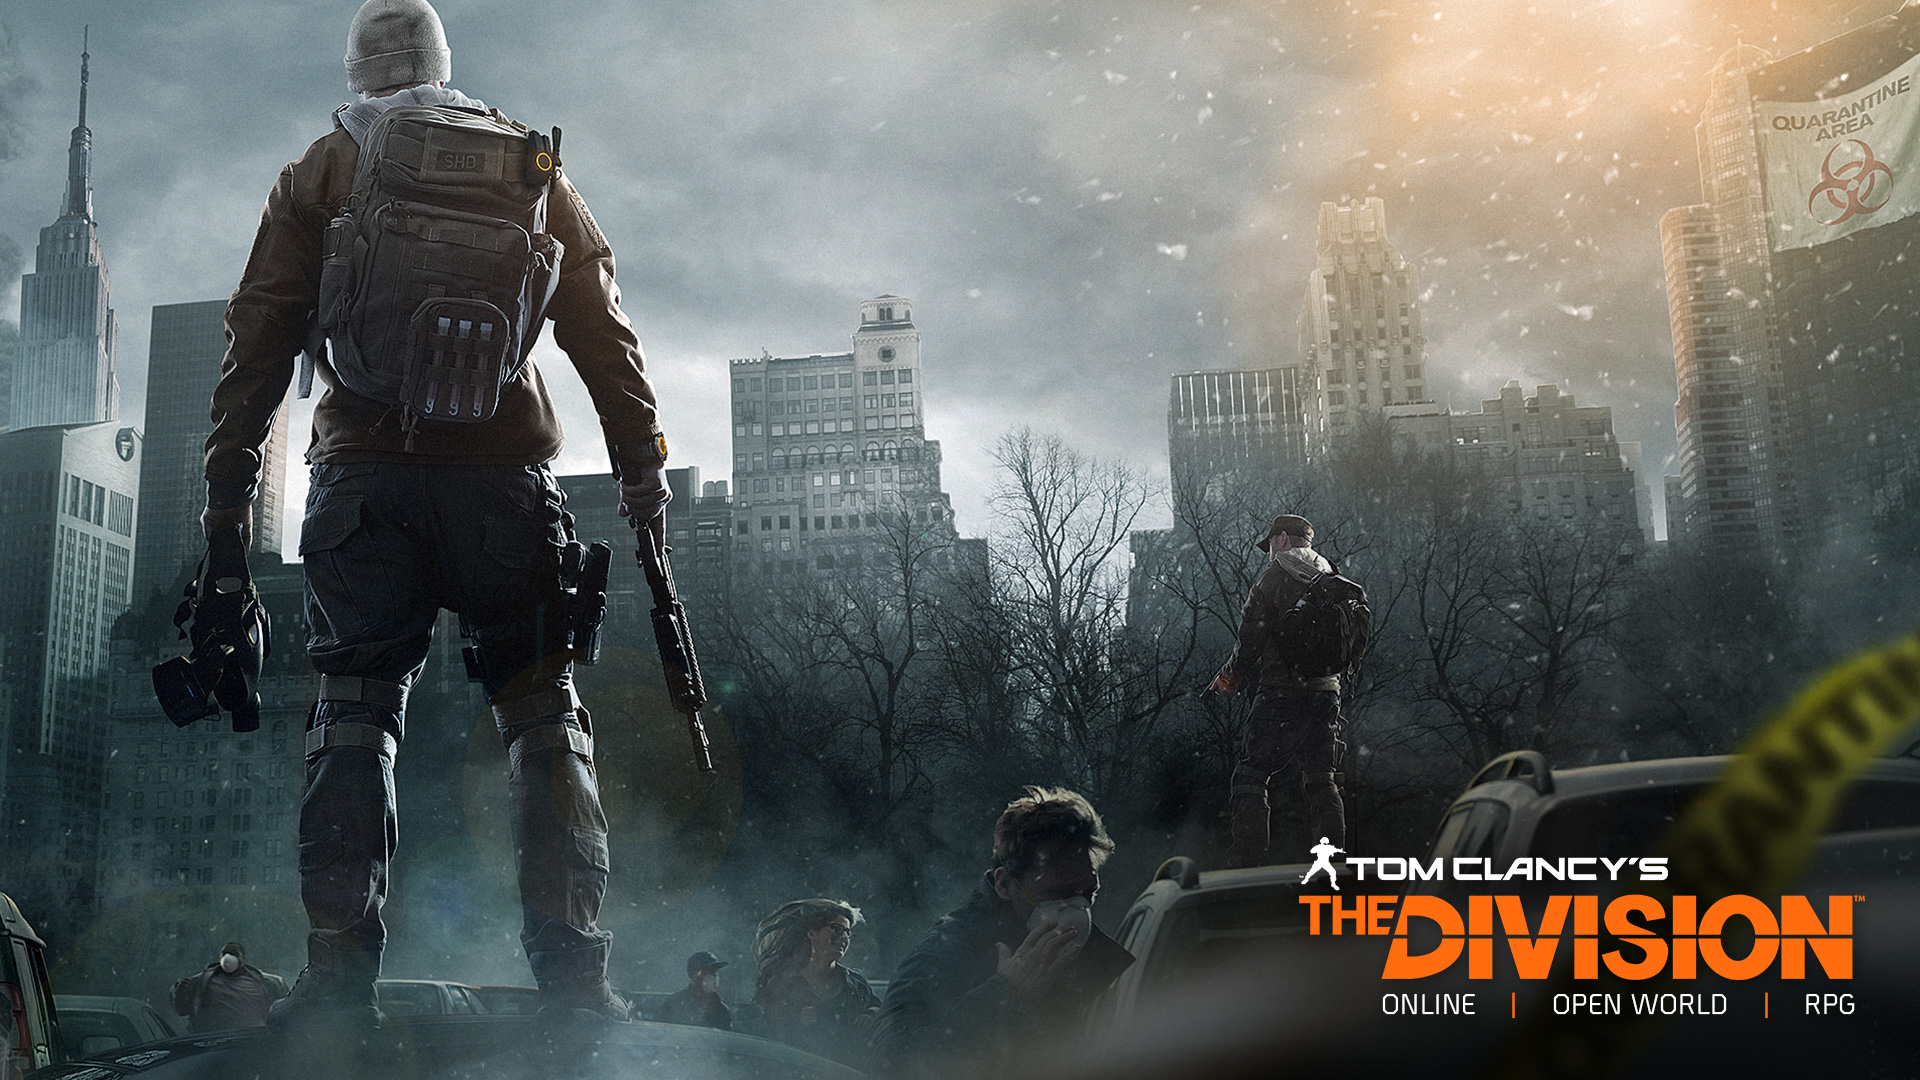 General 1920x1080 video games Tom Clancy's The Division artwork apocalyptic PC gaming science fiction video game art